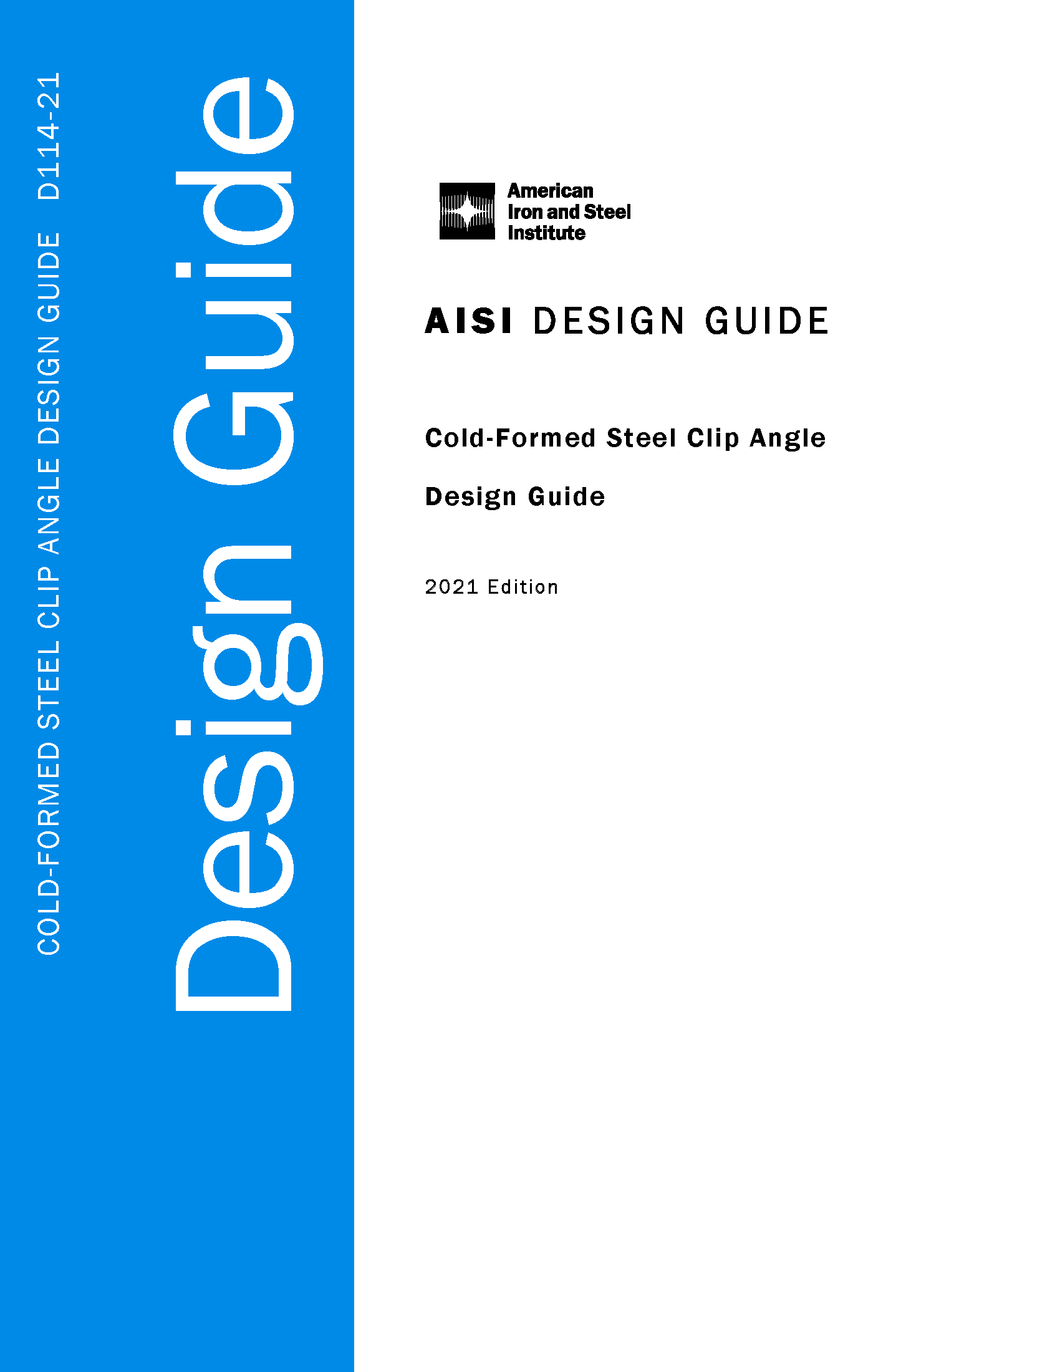 Cold-Formed Steel Clip Angle Design Guide, 2021 Edition - Electronic Version